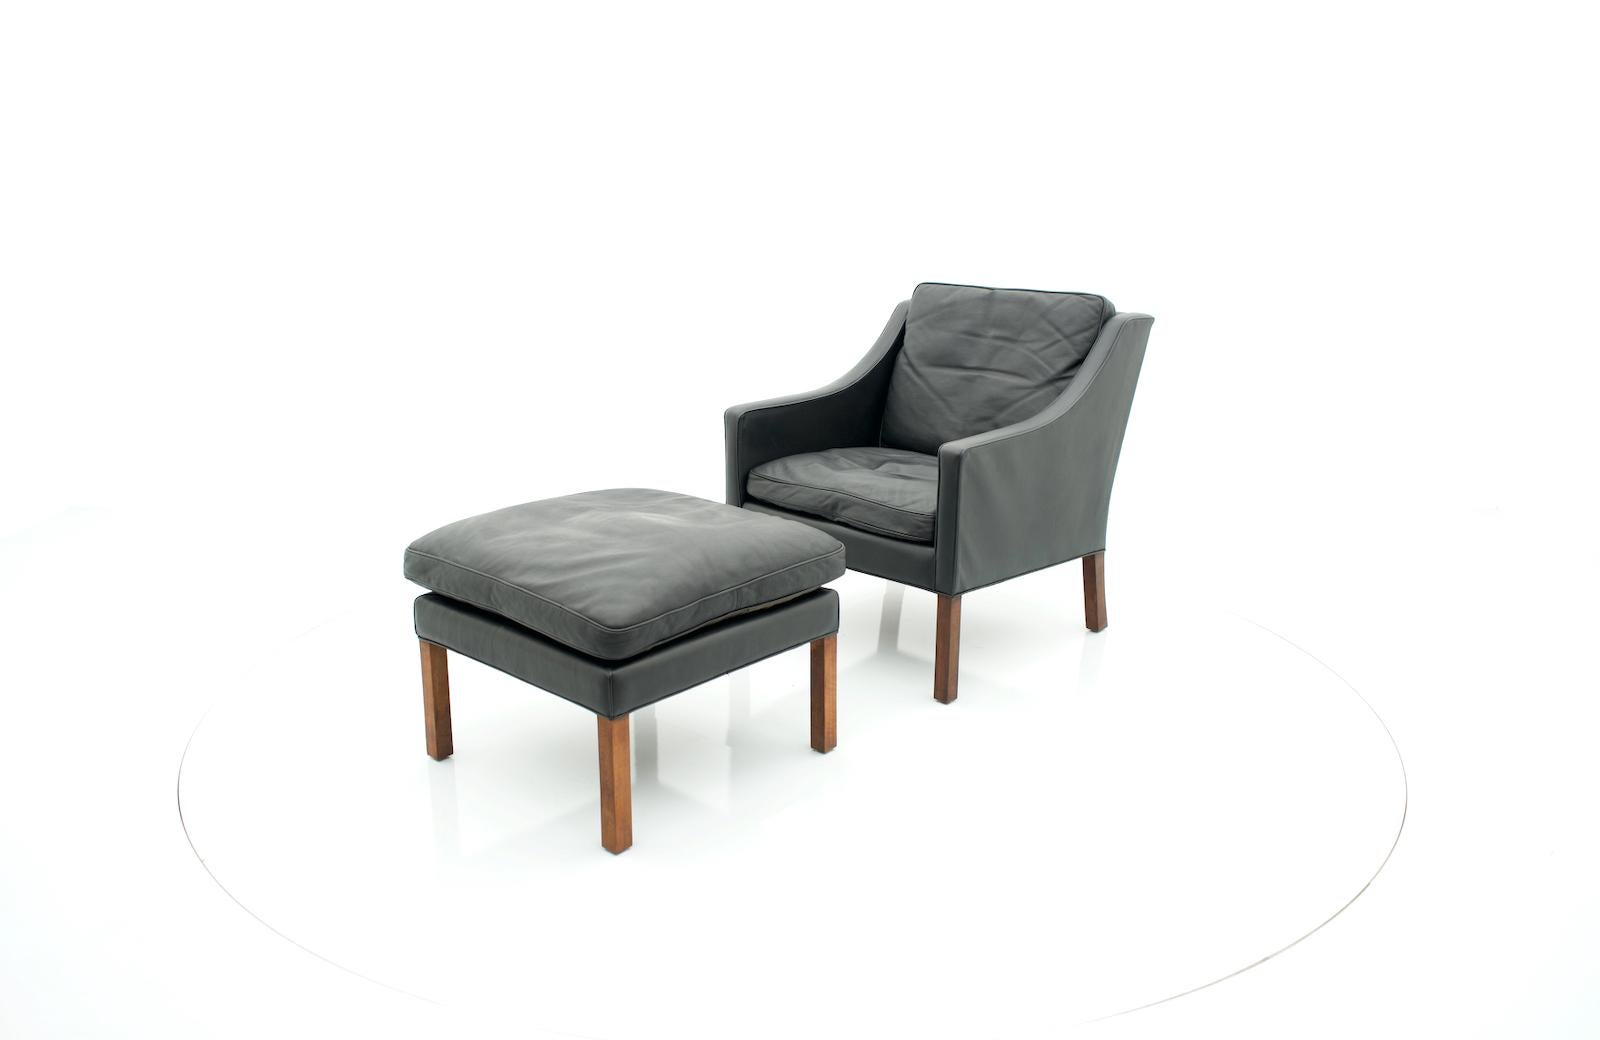 Danish Vintage Lounge Chair with Stool in Black Leather 1960s For Sale 2